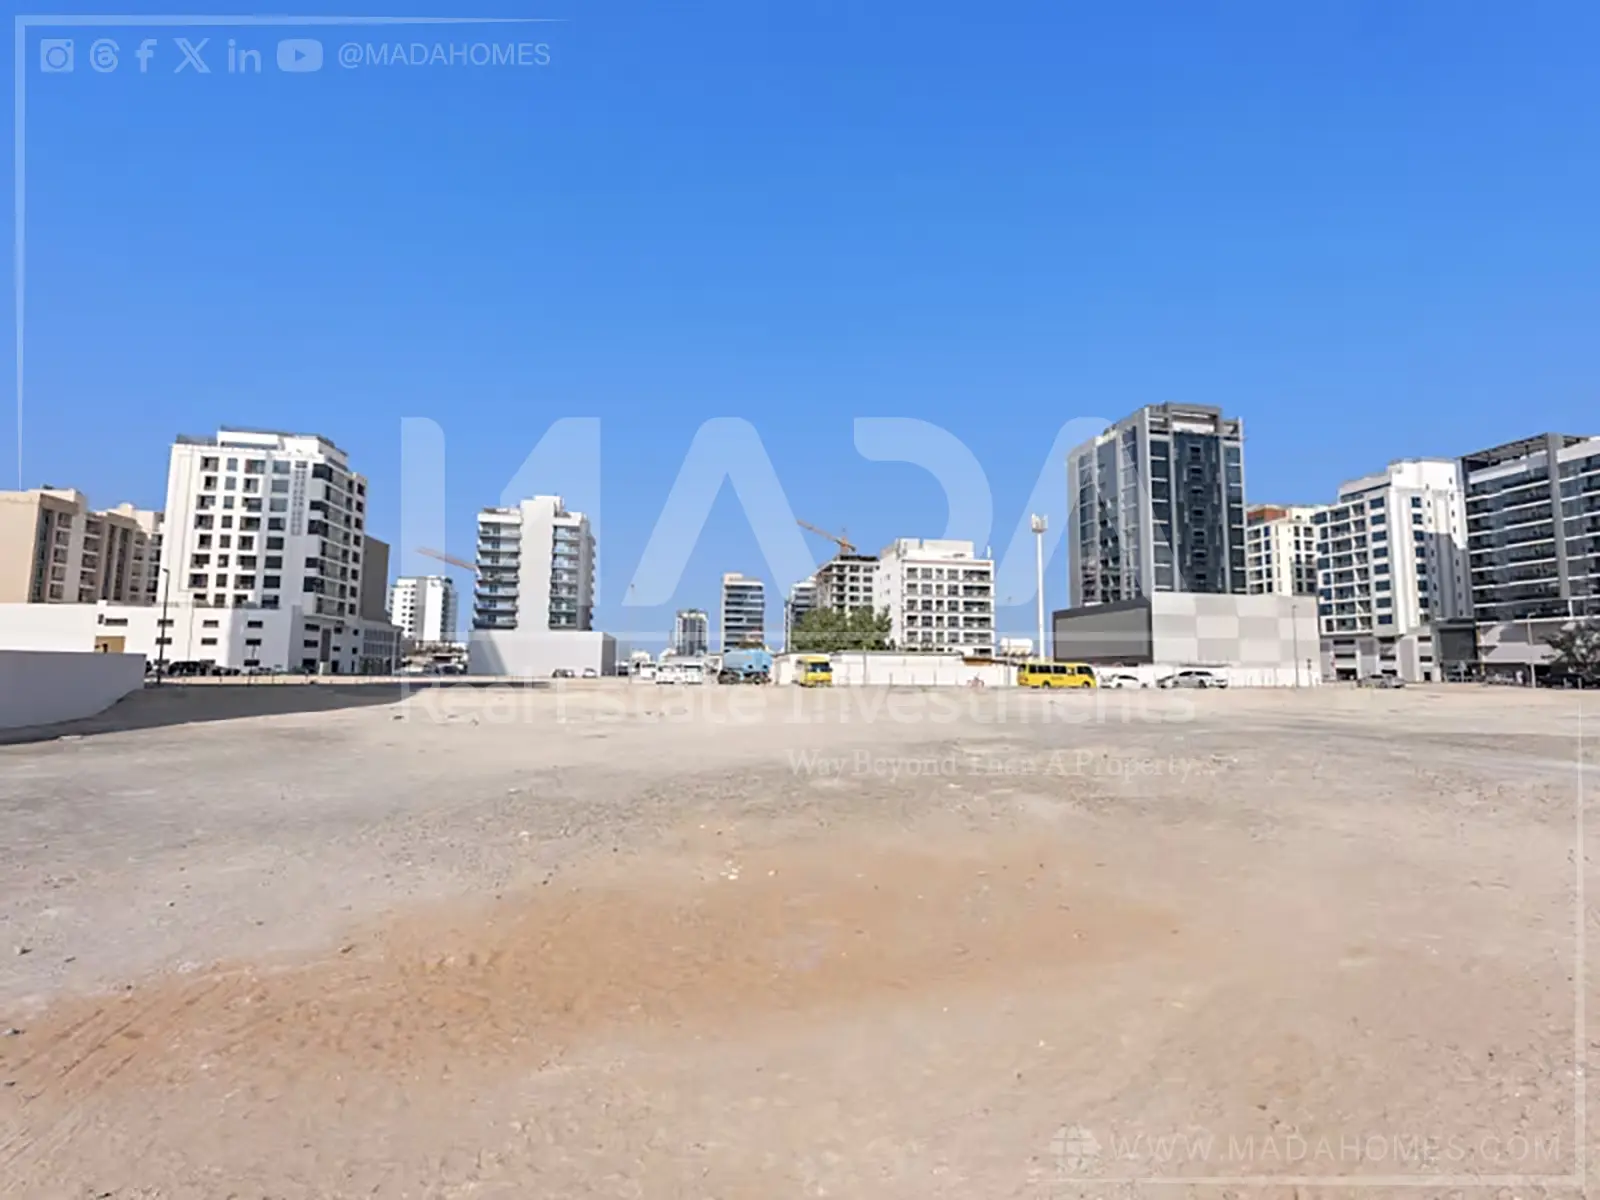 Lands for sale in Dubai with Mada Company